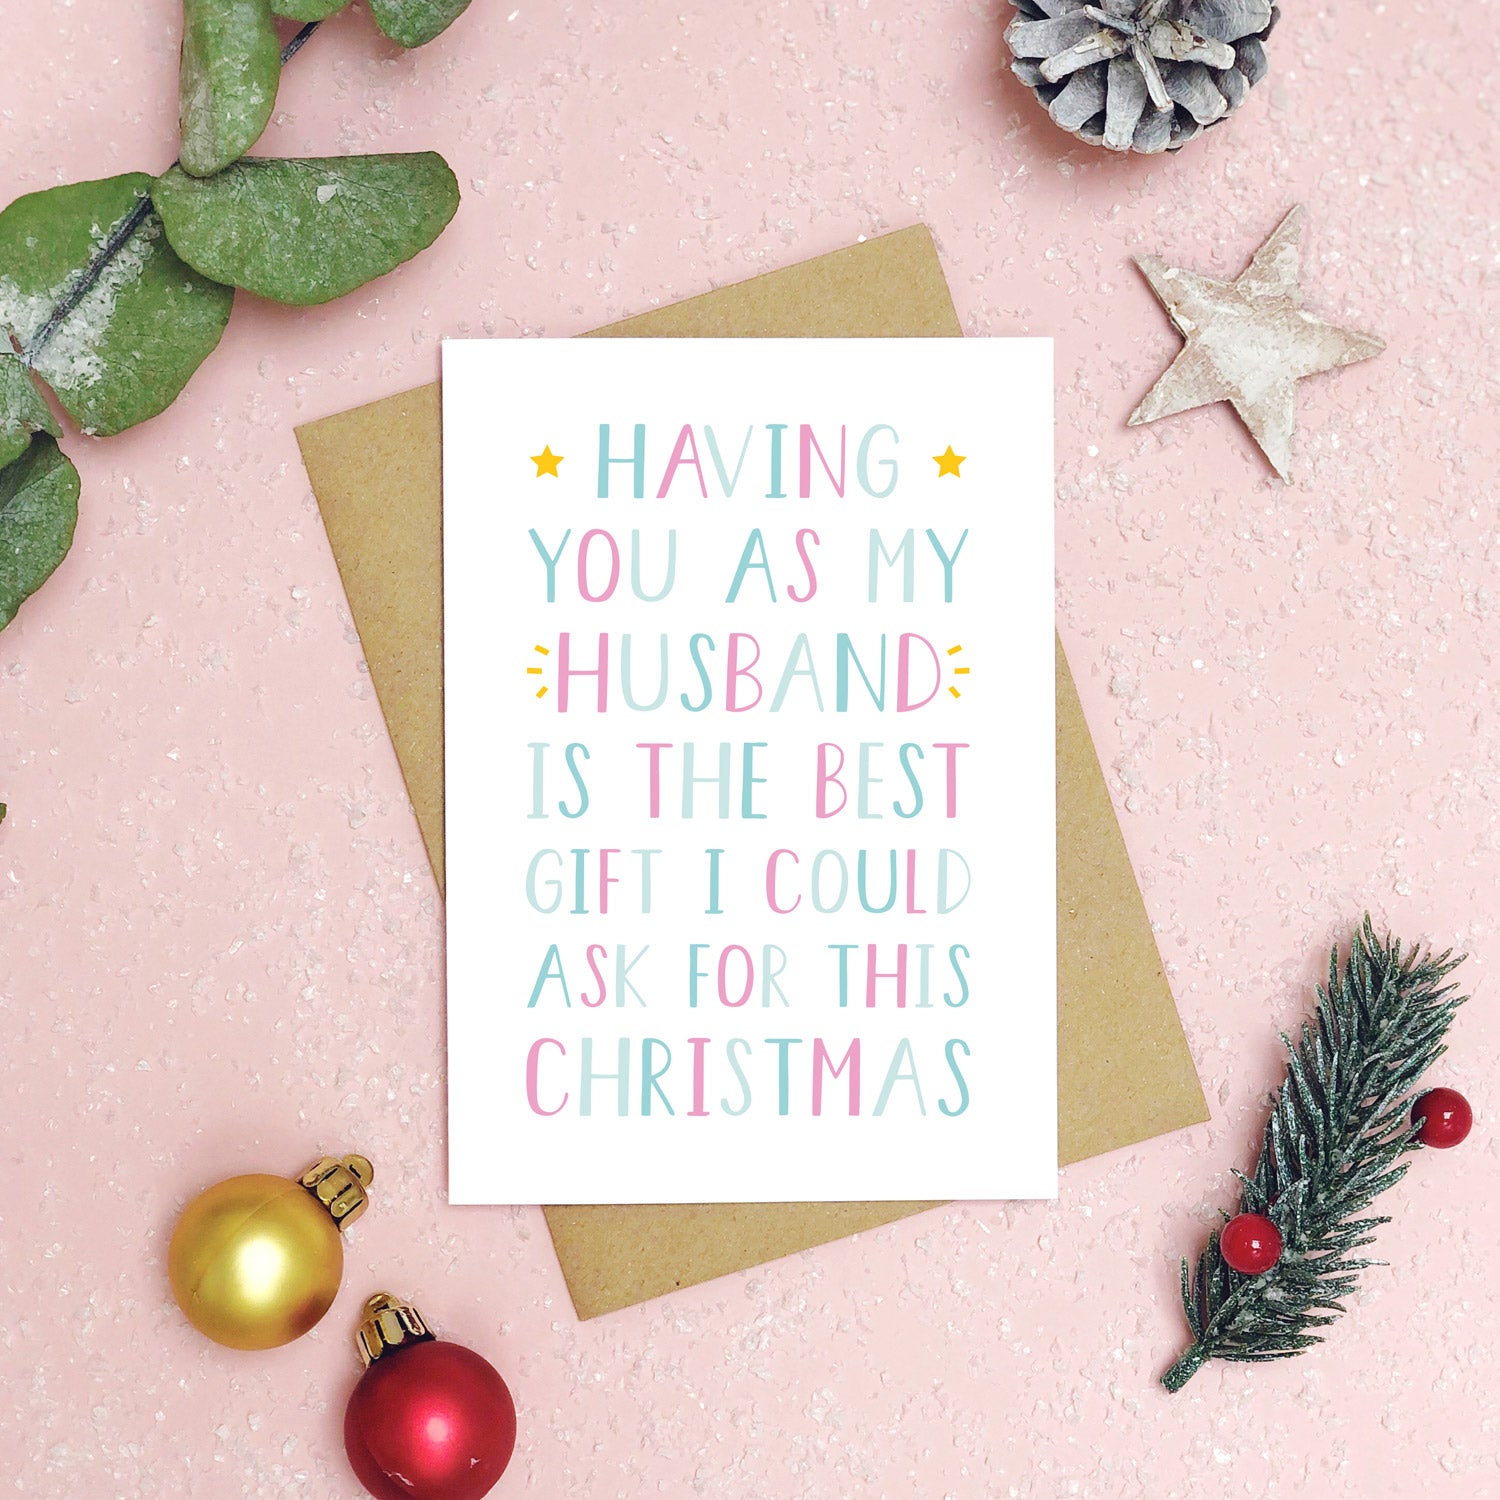 A 'best gift' husband Christmas card is on a pink background with foliage, baubles and Christmas props. The writing on the card is blue and pink.